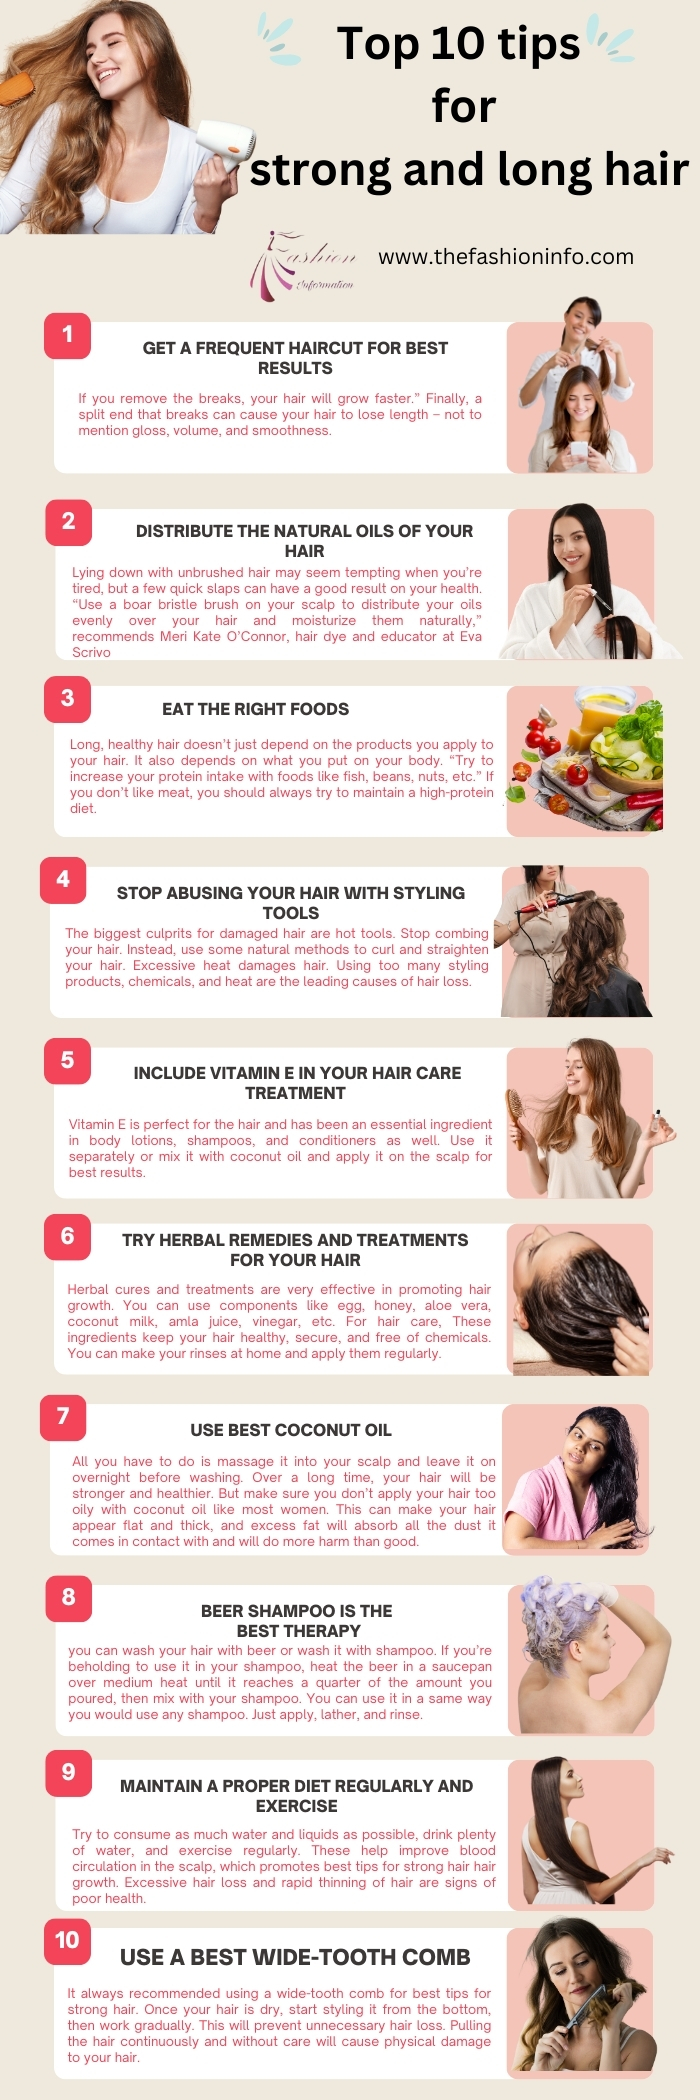 Top 10 tips for strong and long hair